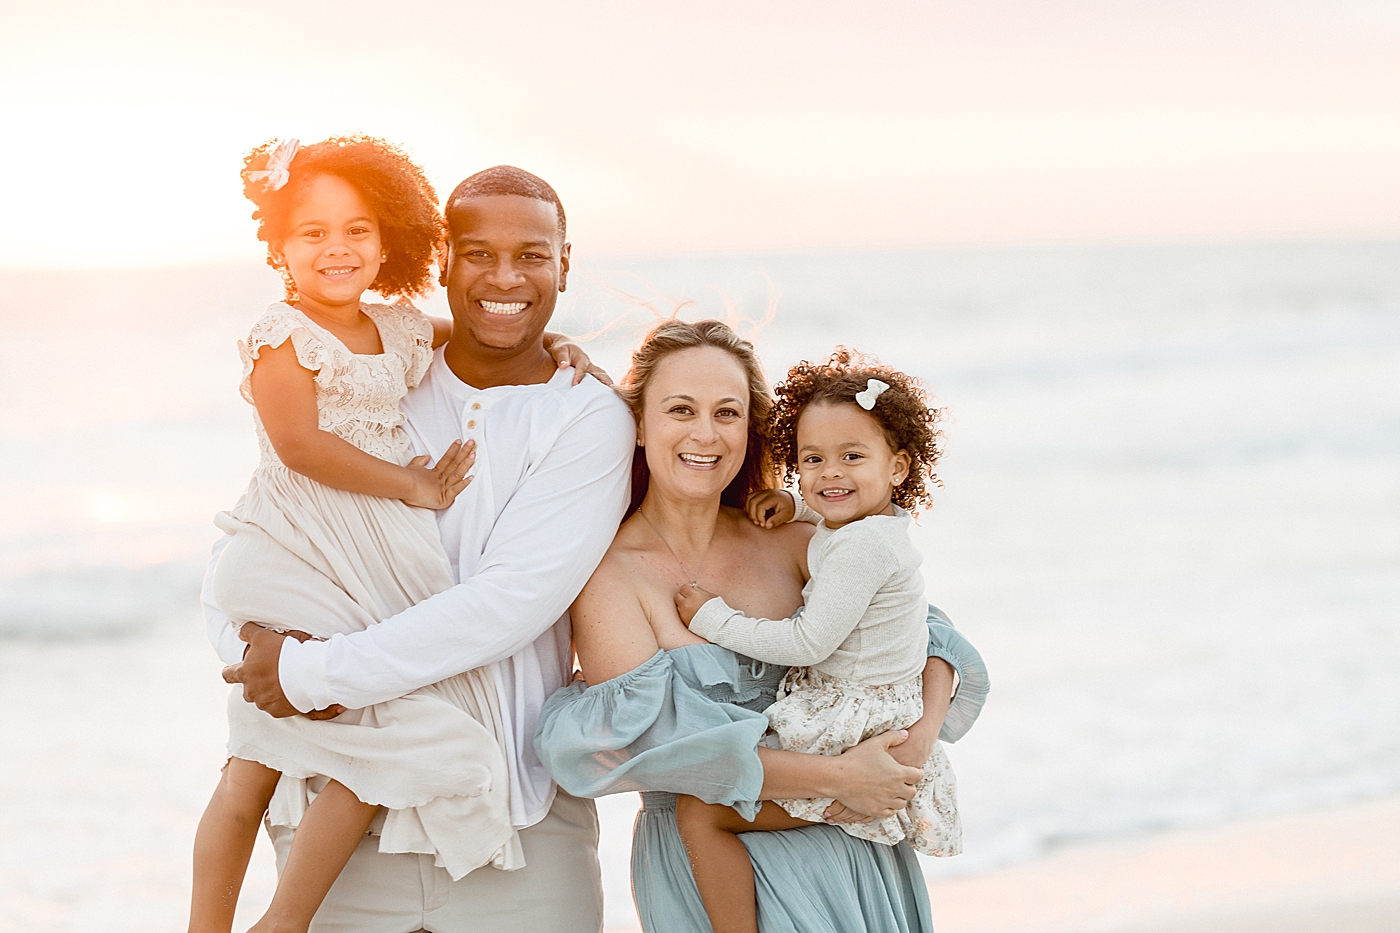 Sunset beach session for family of four in Tampa. Photo by Brittany Elise Photography.